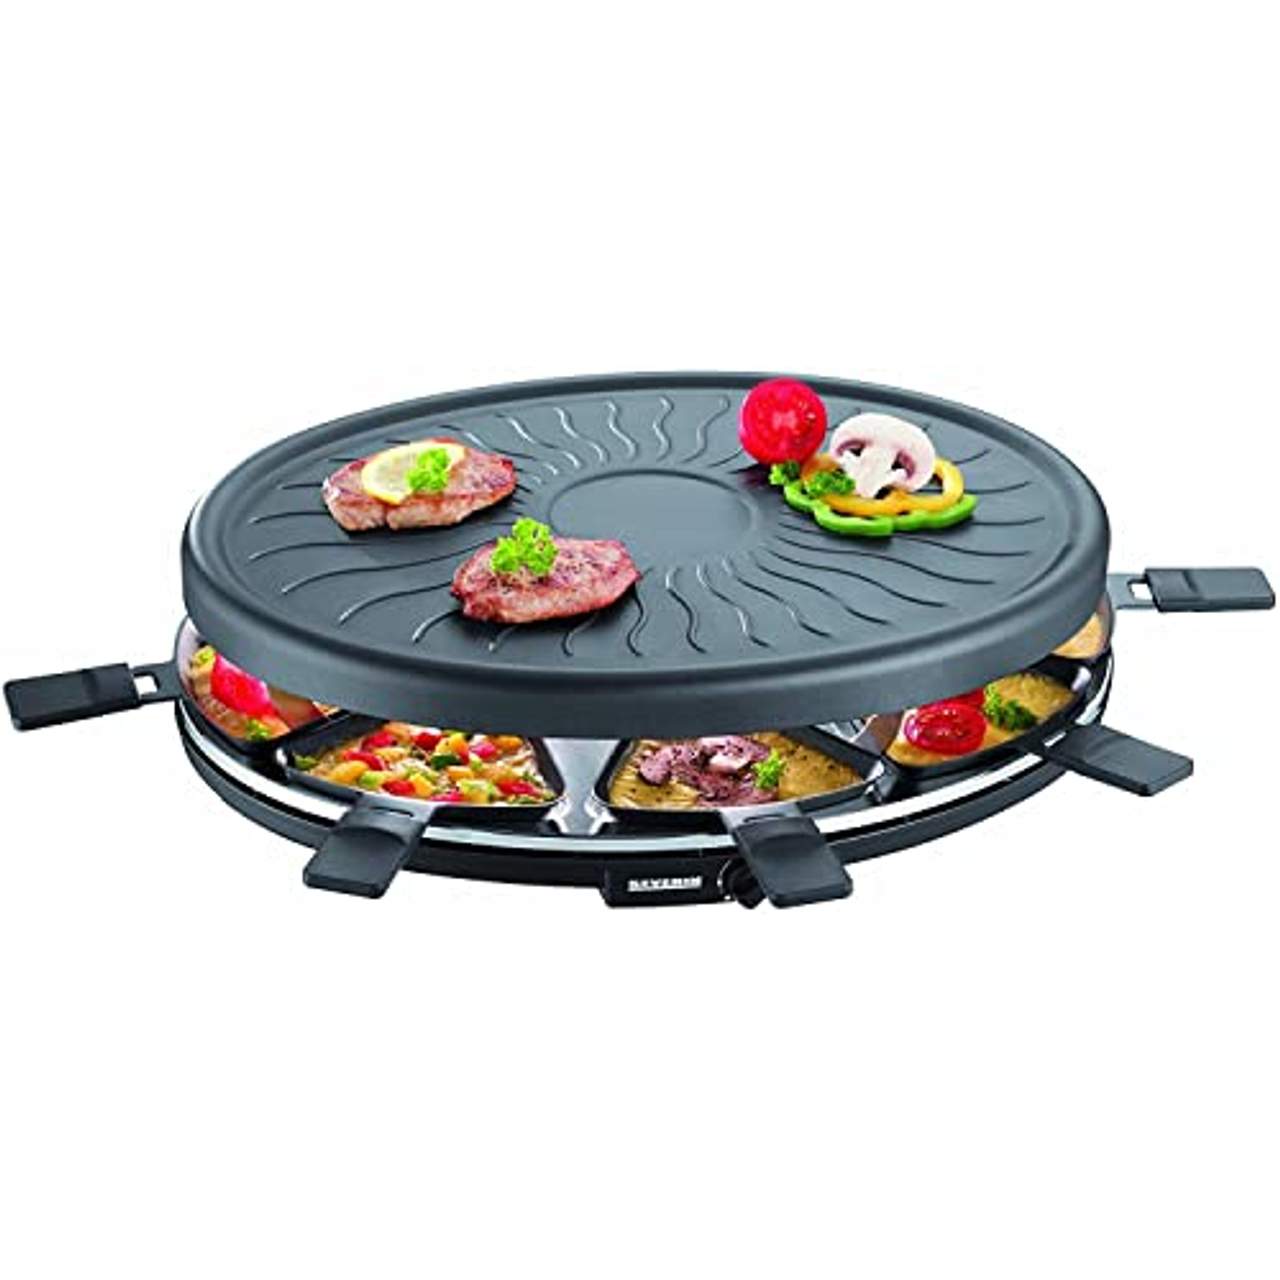 SEVERIN Raclette-Partygrill 